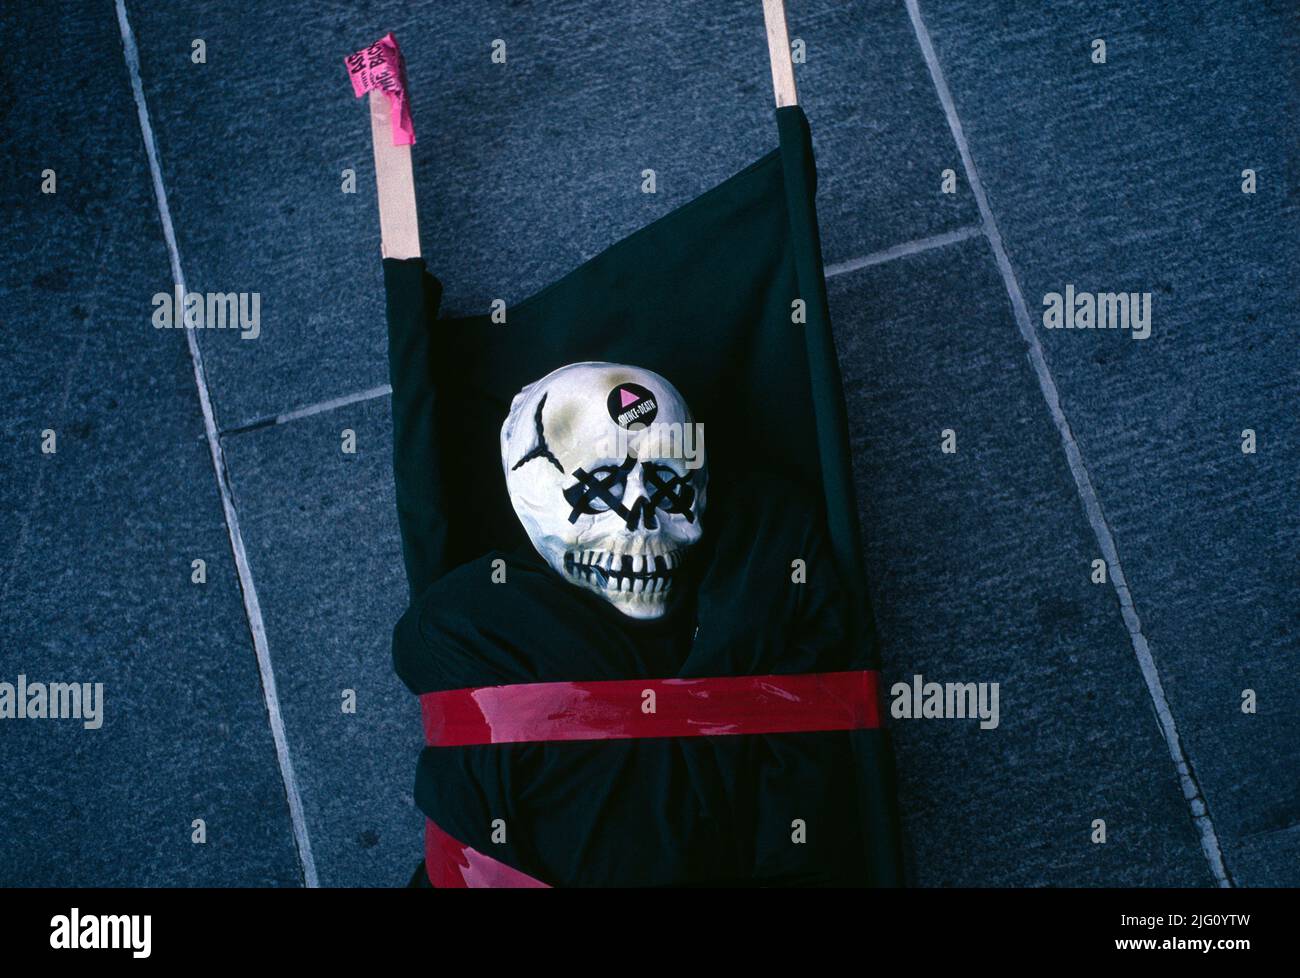 Act Up / San Francisco. Black shrouded mannequin body and skull on a stretcher outside the entrance to the United States Federal Building in San Francisco, CA, during a National Day of Protest called “Living with AIDS and Fighting Back” by Act Up in October 1989. Stock Photo